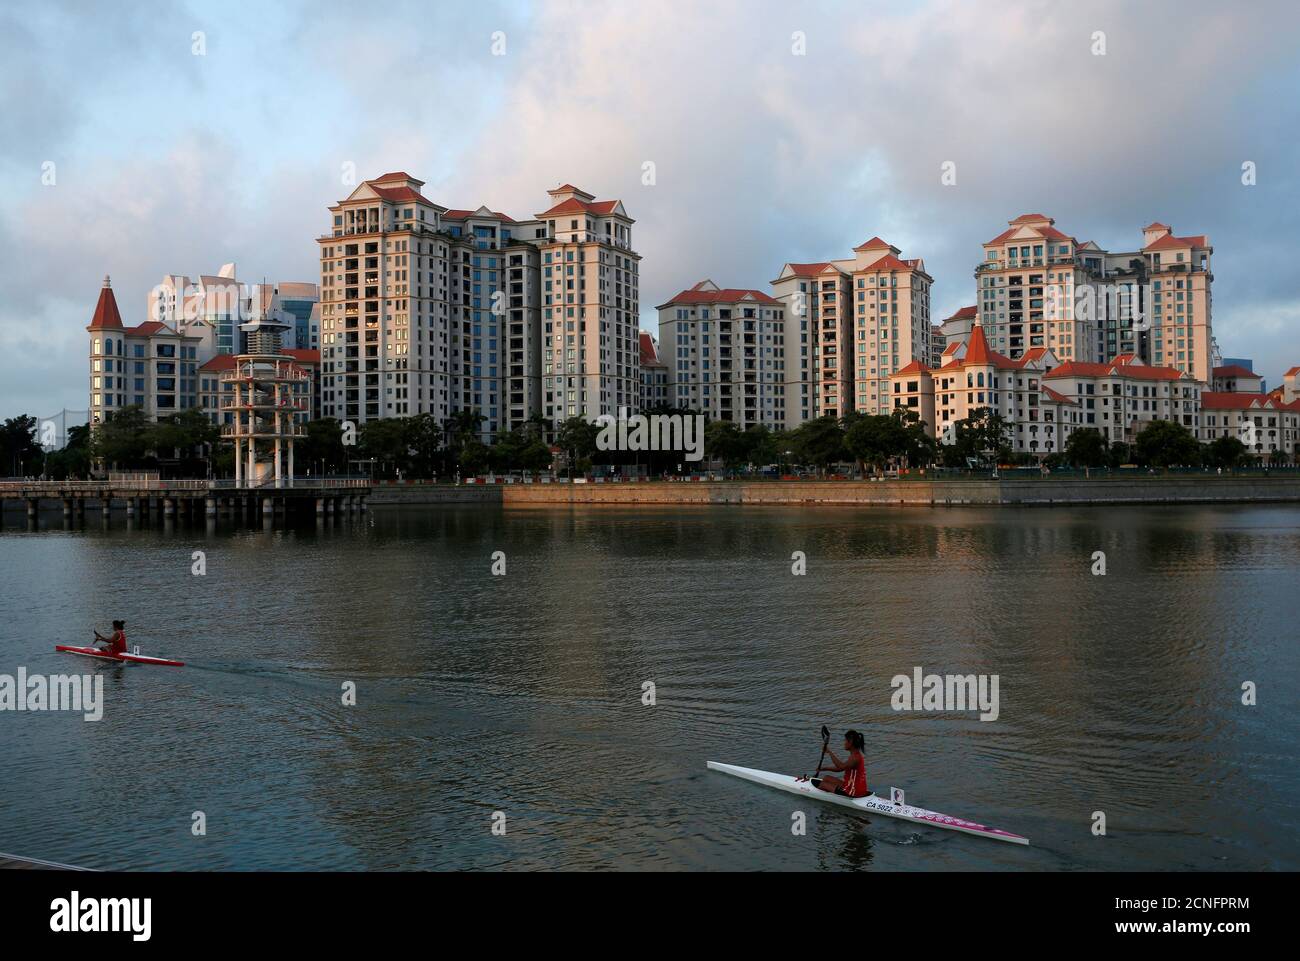 Kayakers pass private residential condominiums at Tanjong Rhu in Singapore August 18, 2016. REUTERS/Edgar Su/File Photo             GLOBAL BUSINESS WEEK AHEAD PACKAGE    SEARCH BUSINESS WEEK AHEAD 17 OCT FOR ALL IMAGES Stock Photo